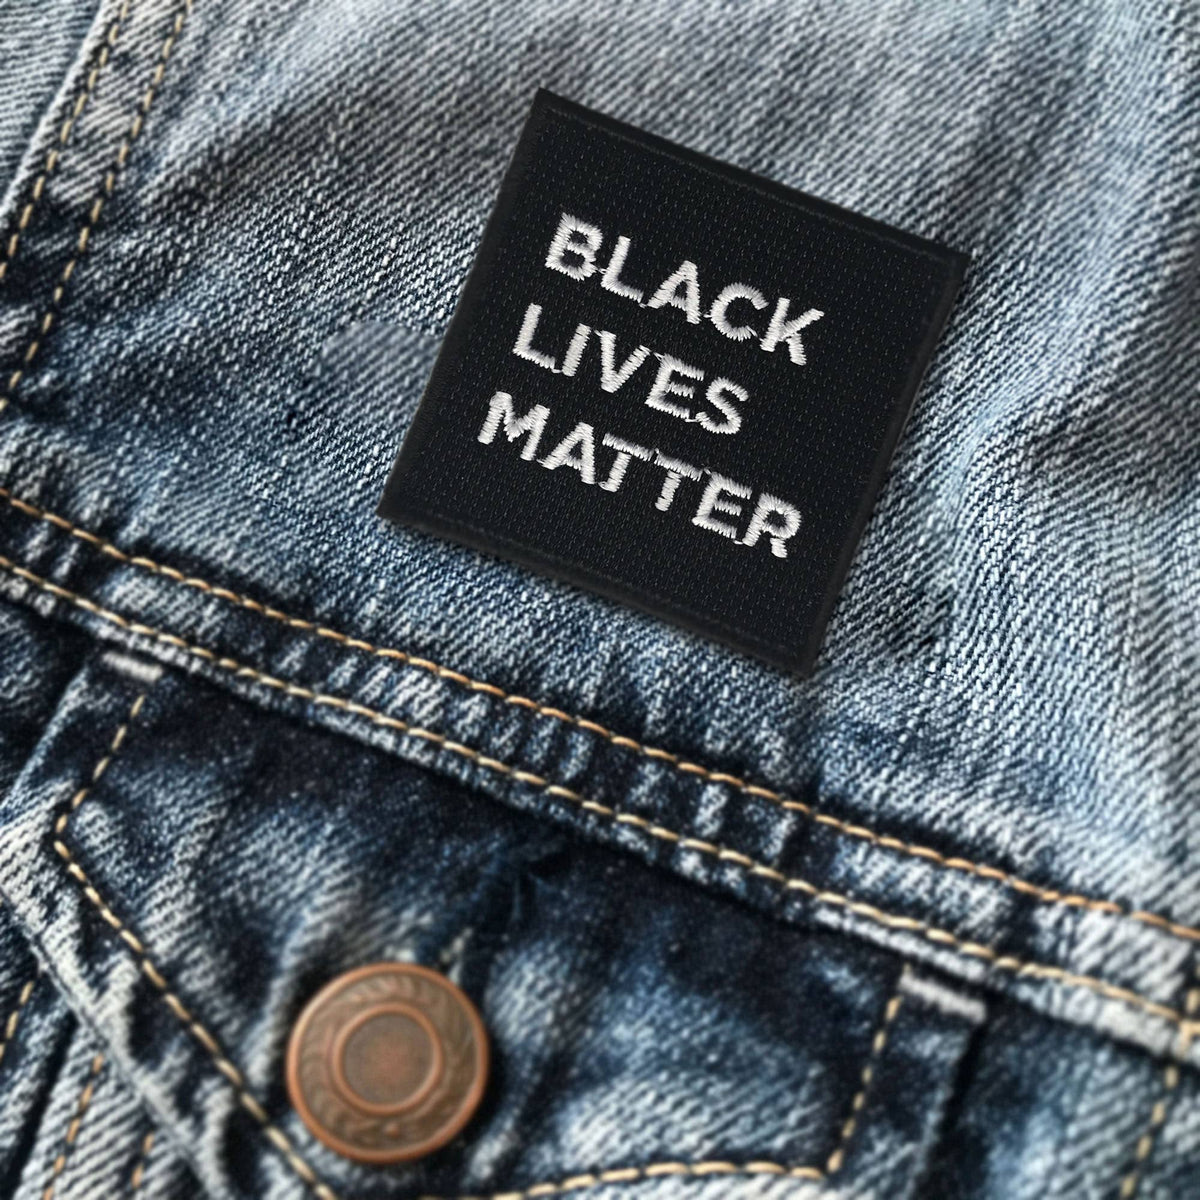 Black Lives Matter (BLM) Iron On Patch